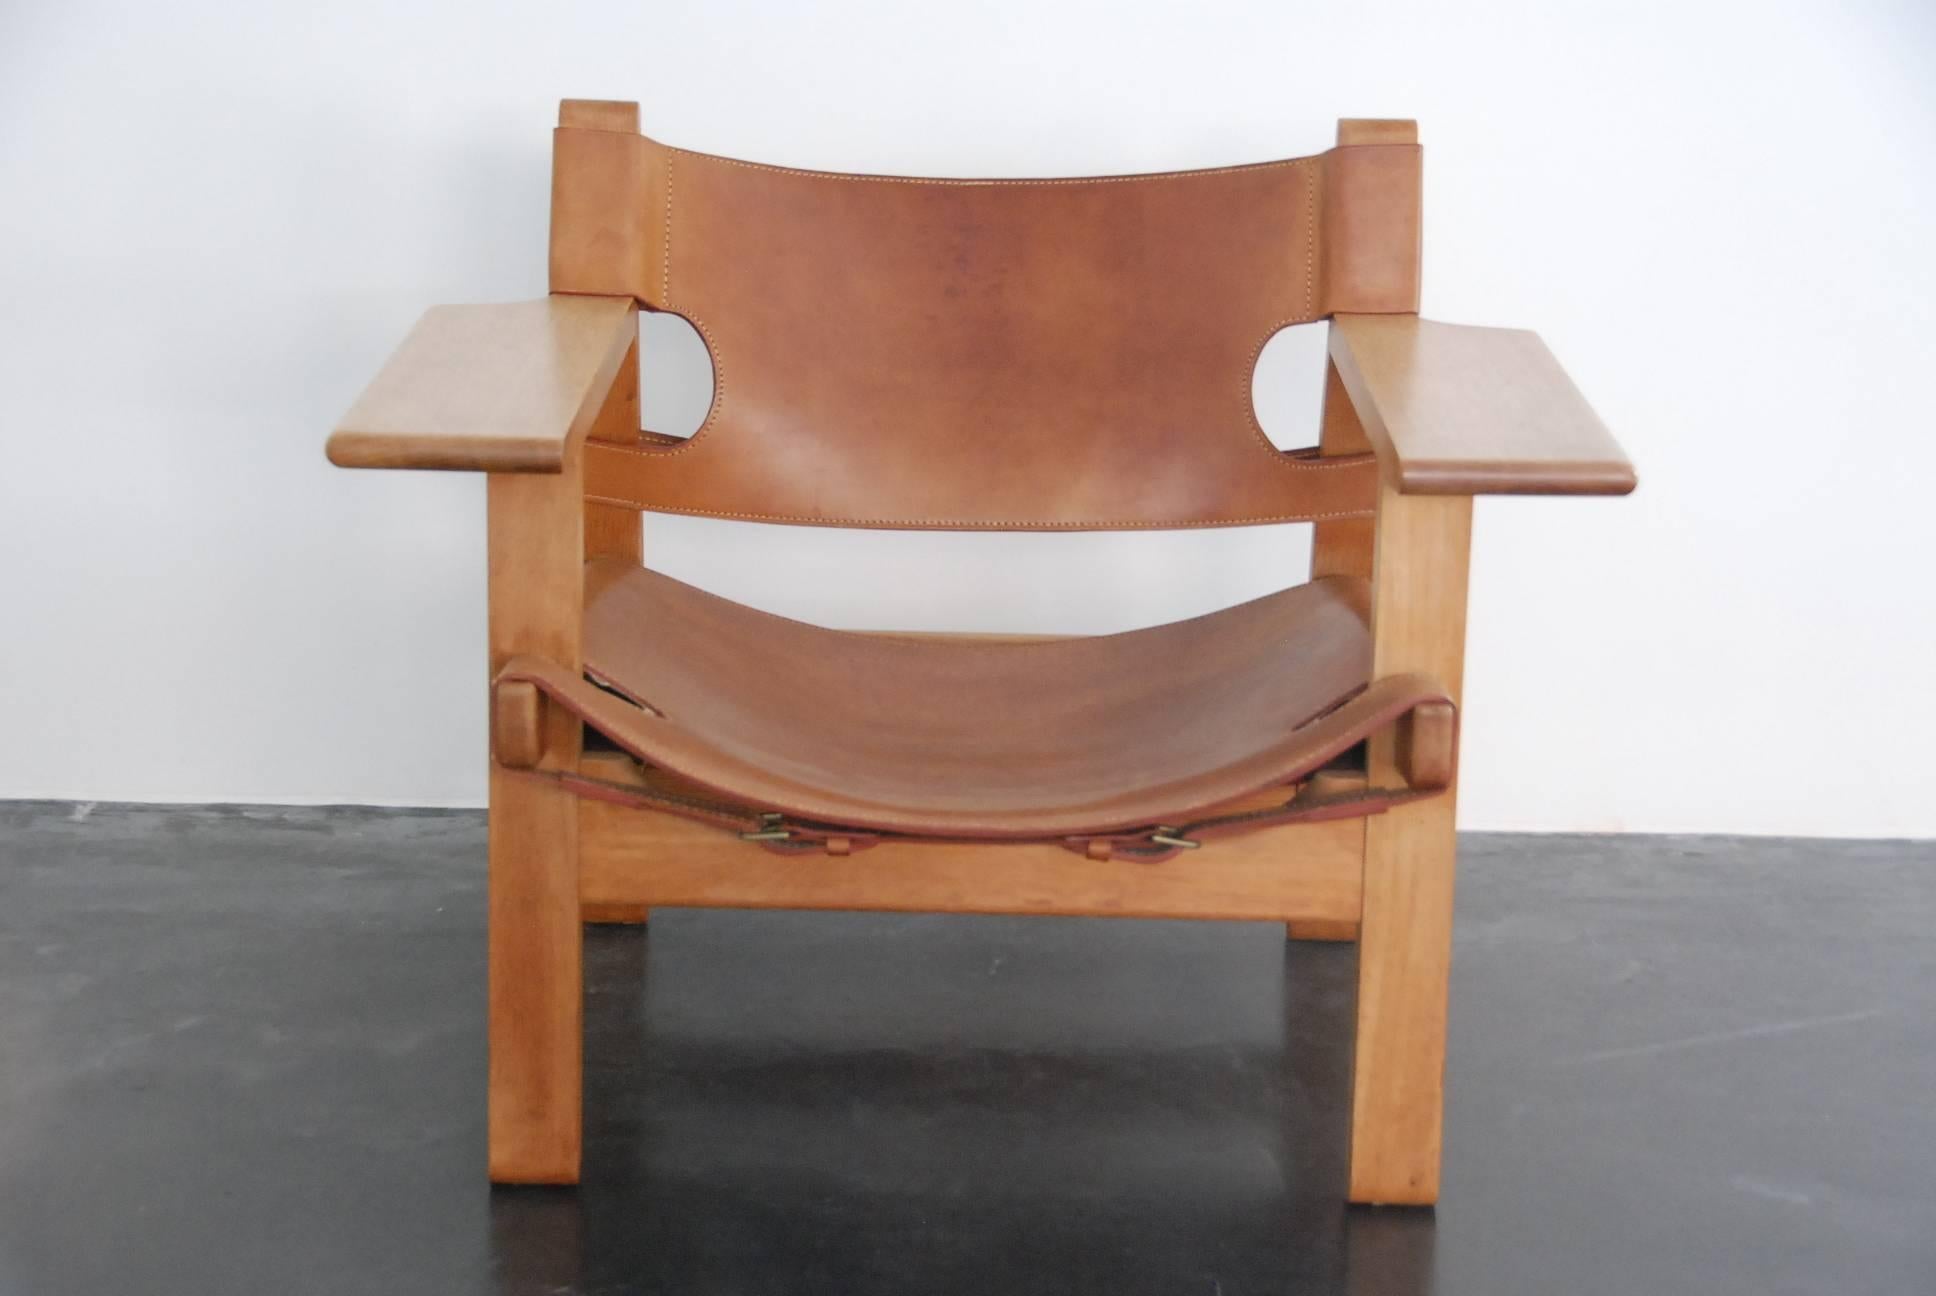 'Spanish Chair' in solid oak and cognac leather by Børge Mogensen. Manufactured by Fredericia Furniture, Denmark, circa 1950.
This well-known iconic piece by Mogensen has a very strong appearance. The sincere construction and ditto type of